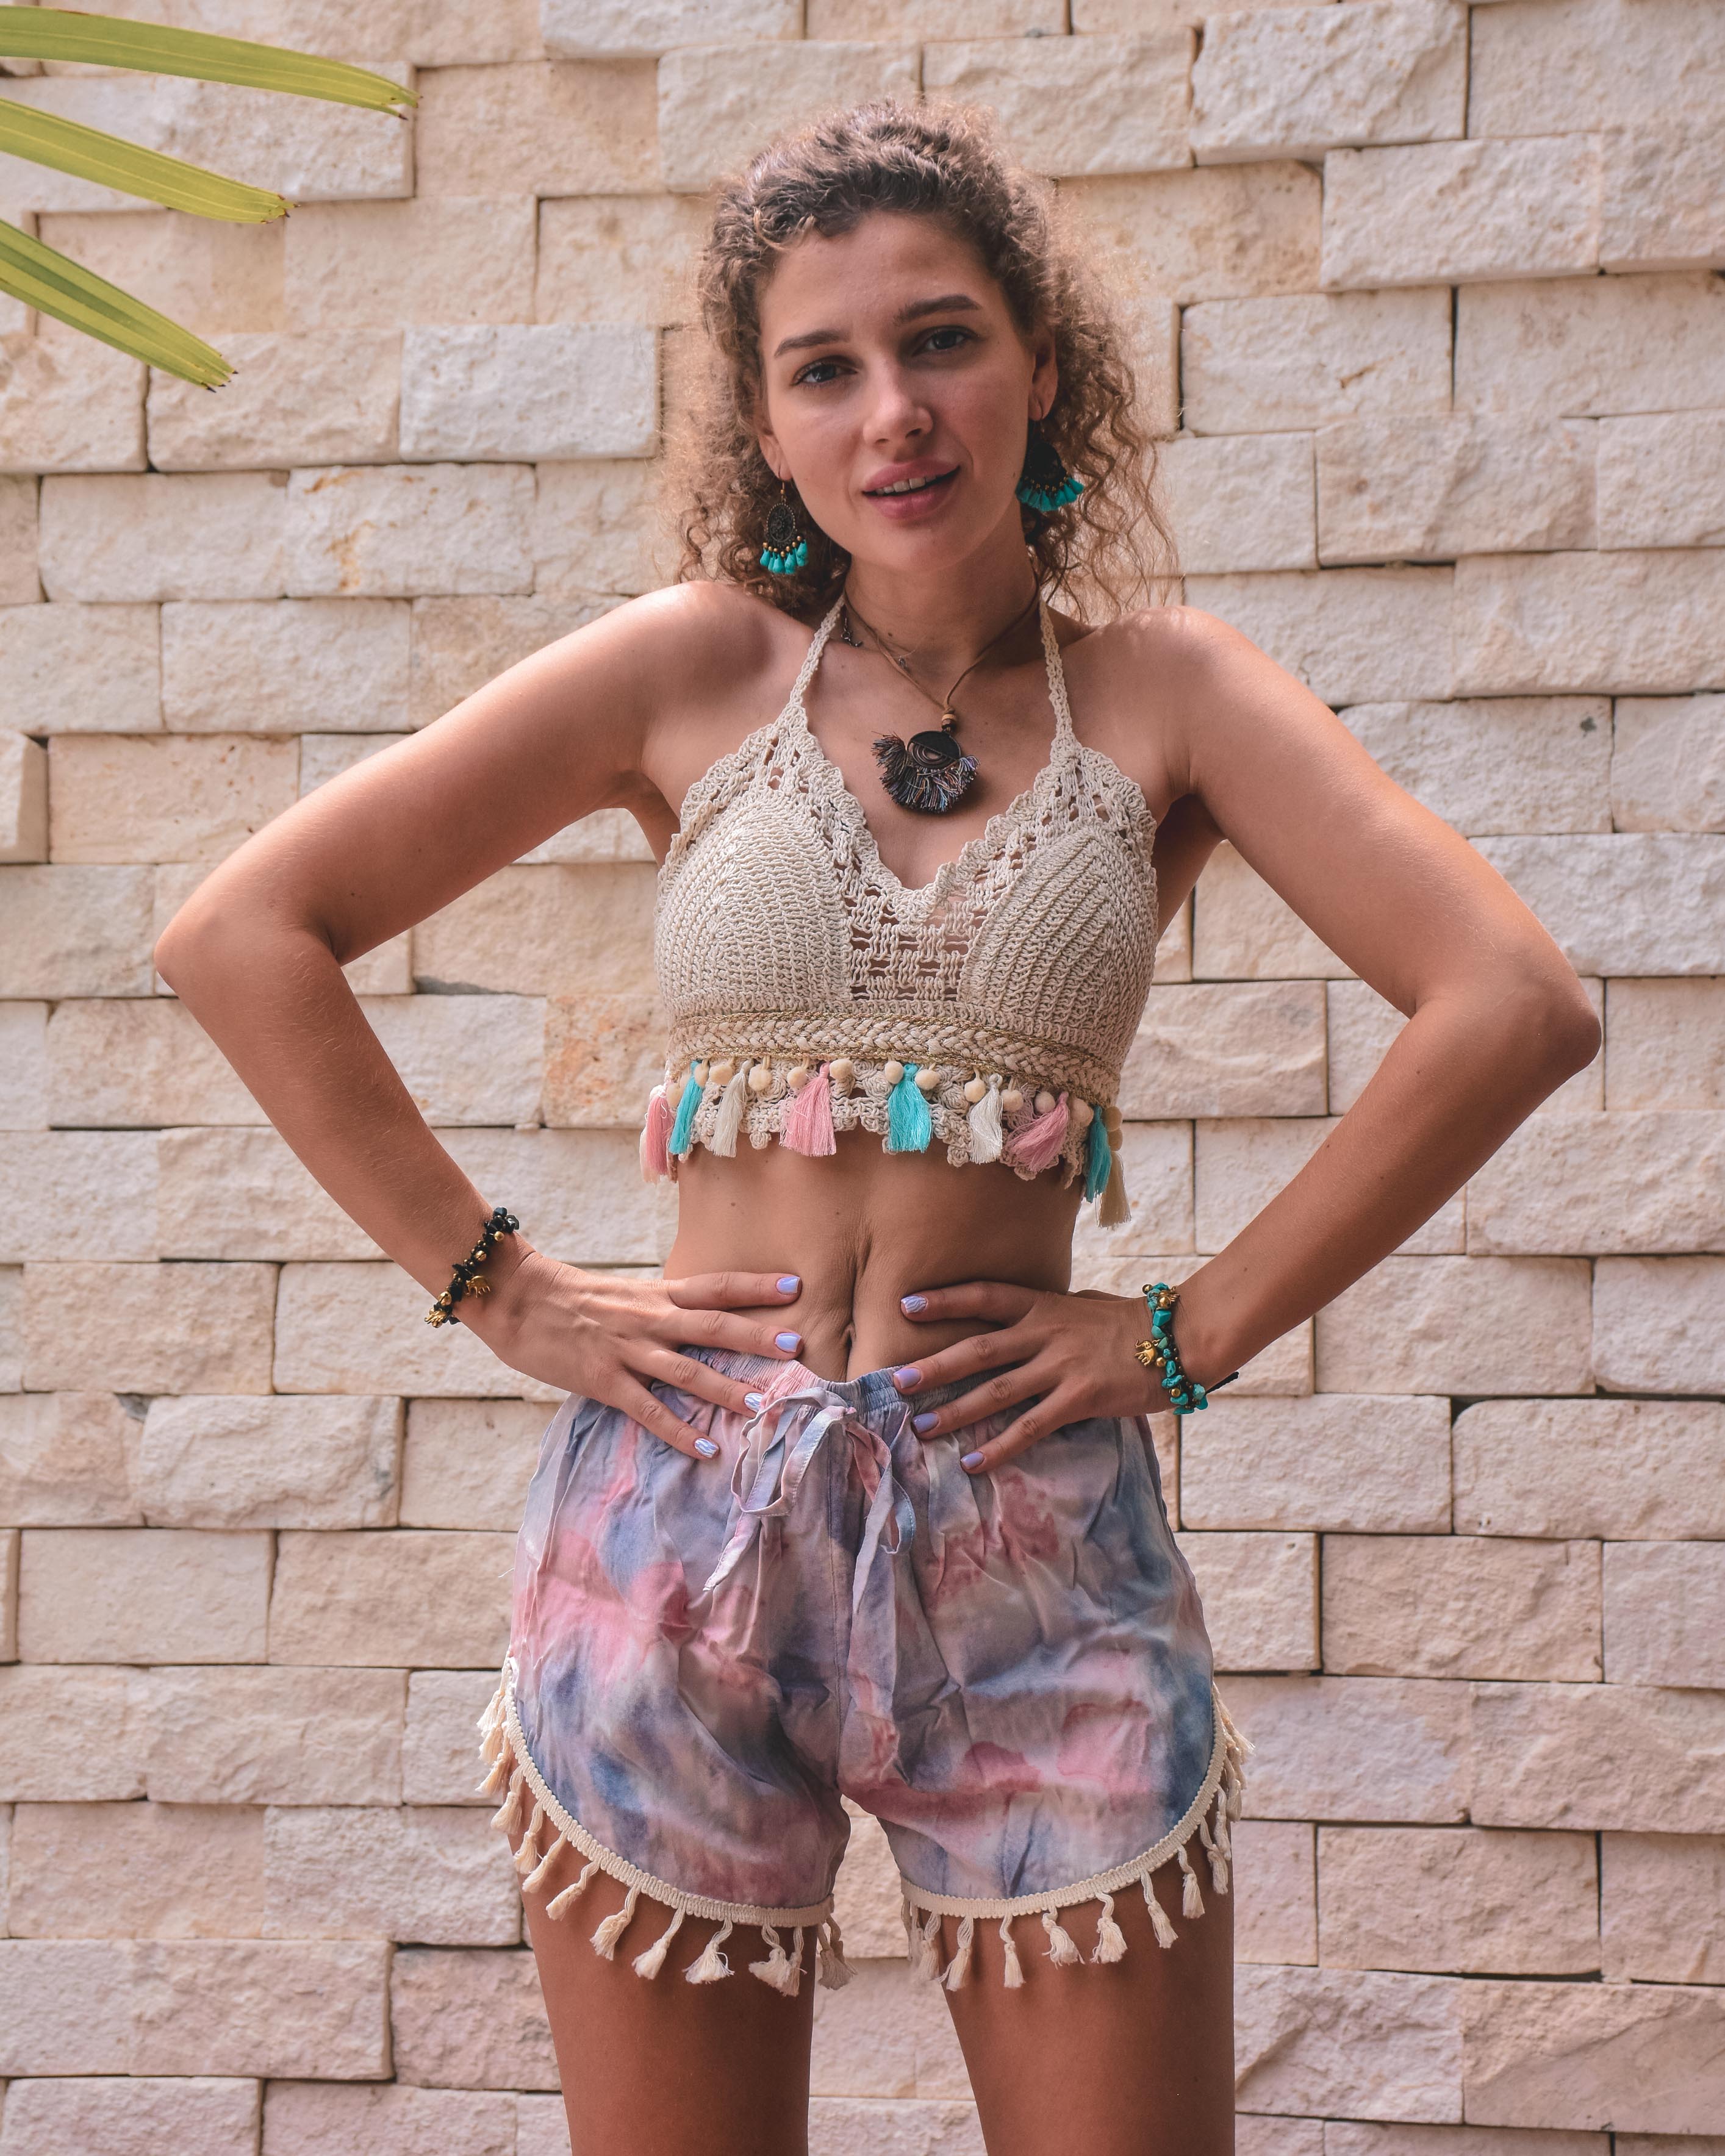 TIE DYE SHORTS Elepanta Women's Shorts - Buy Today Elephant Pants Jewelry And Bohemian Clothes Handmade In Thailand Help To Save The Elephants FairTrade And Vegan